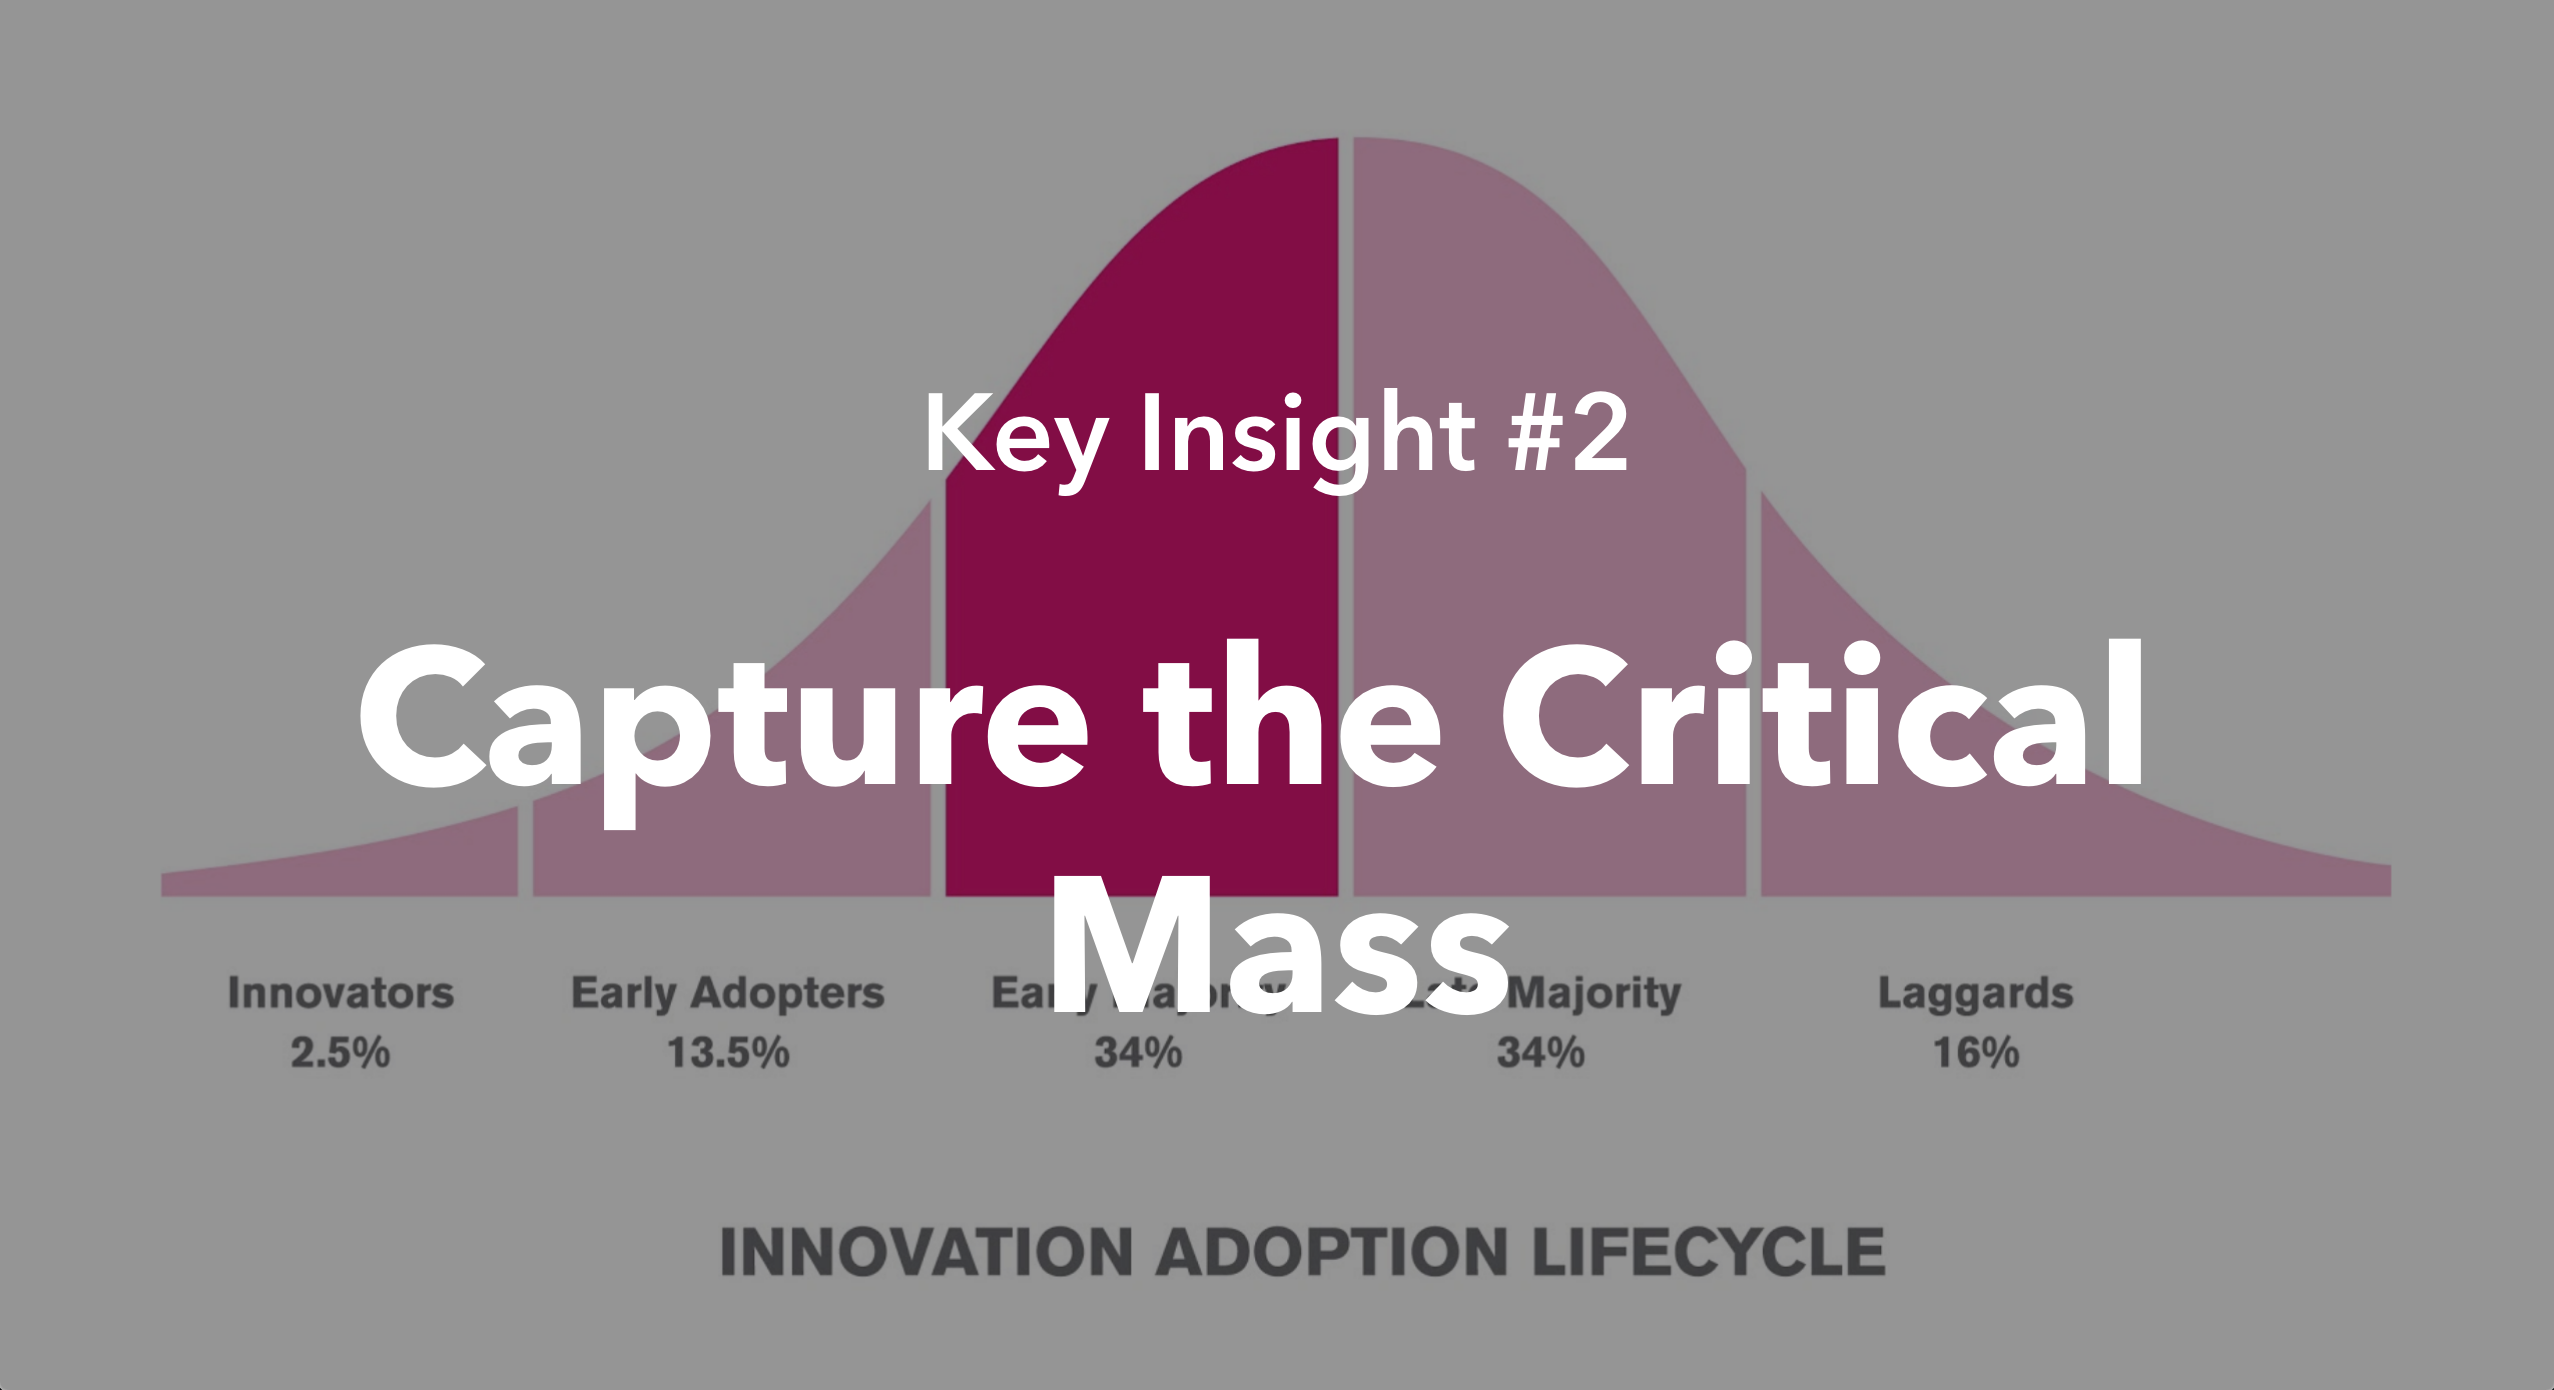 solution #3 - capturing the critical mass of users